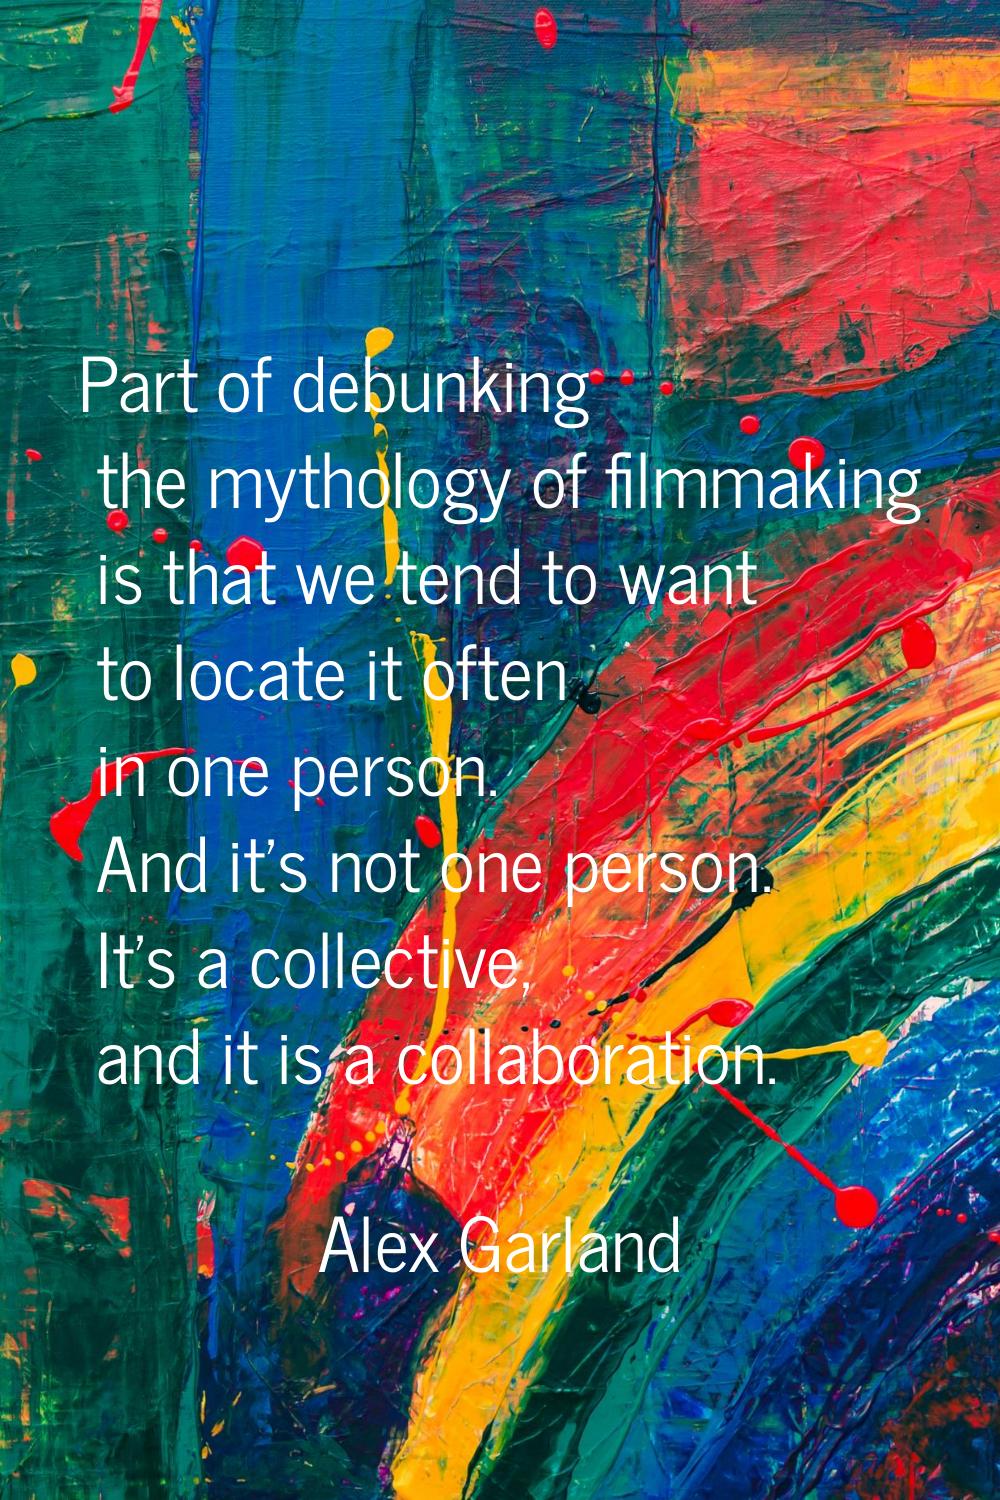 Part of debunking the mythology of filmmaking is that we tend to want to locate it often in one per